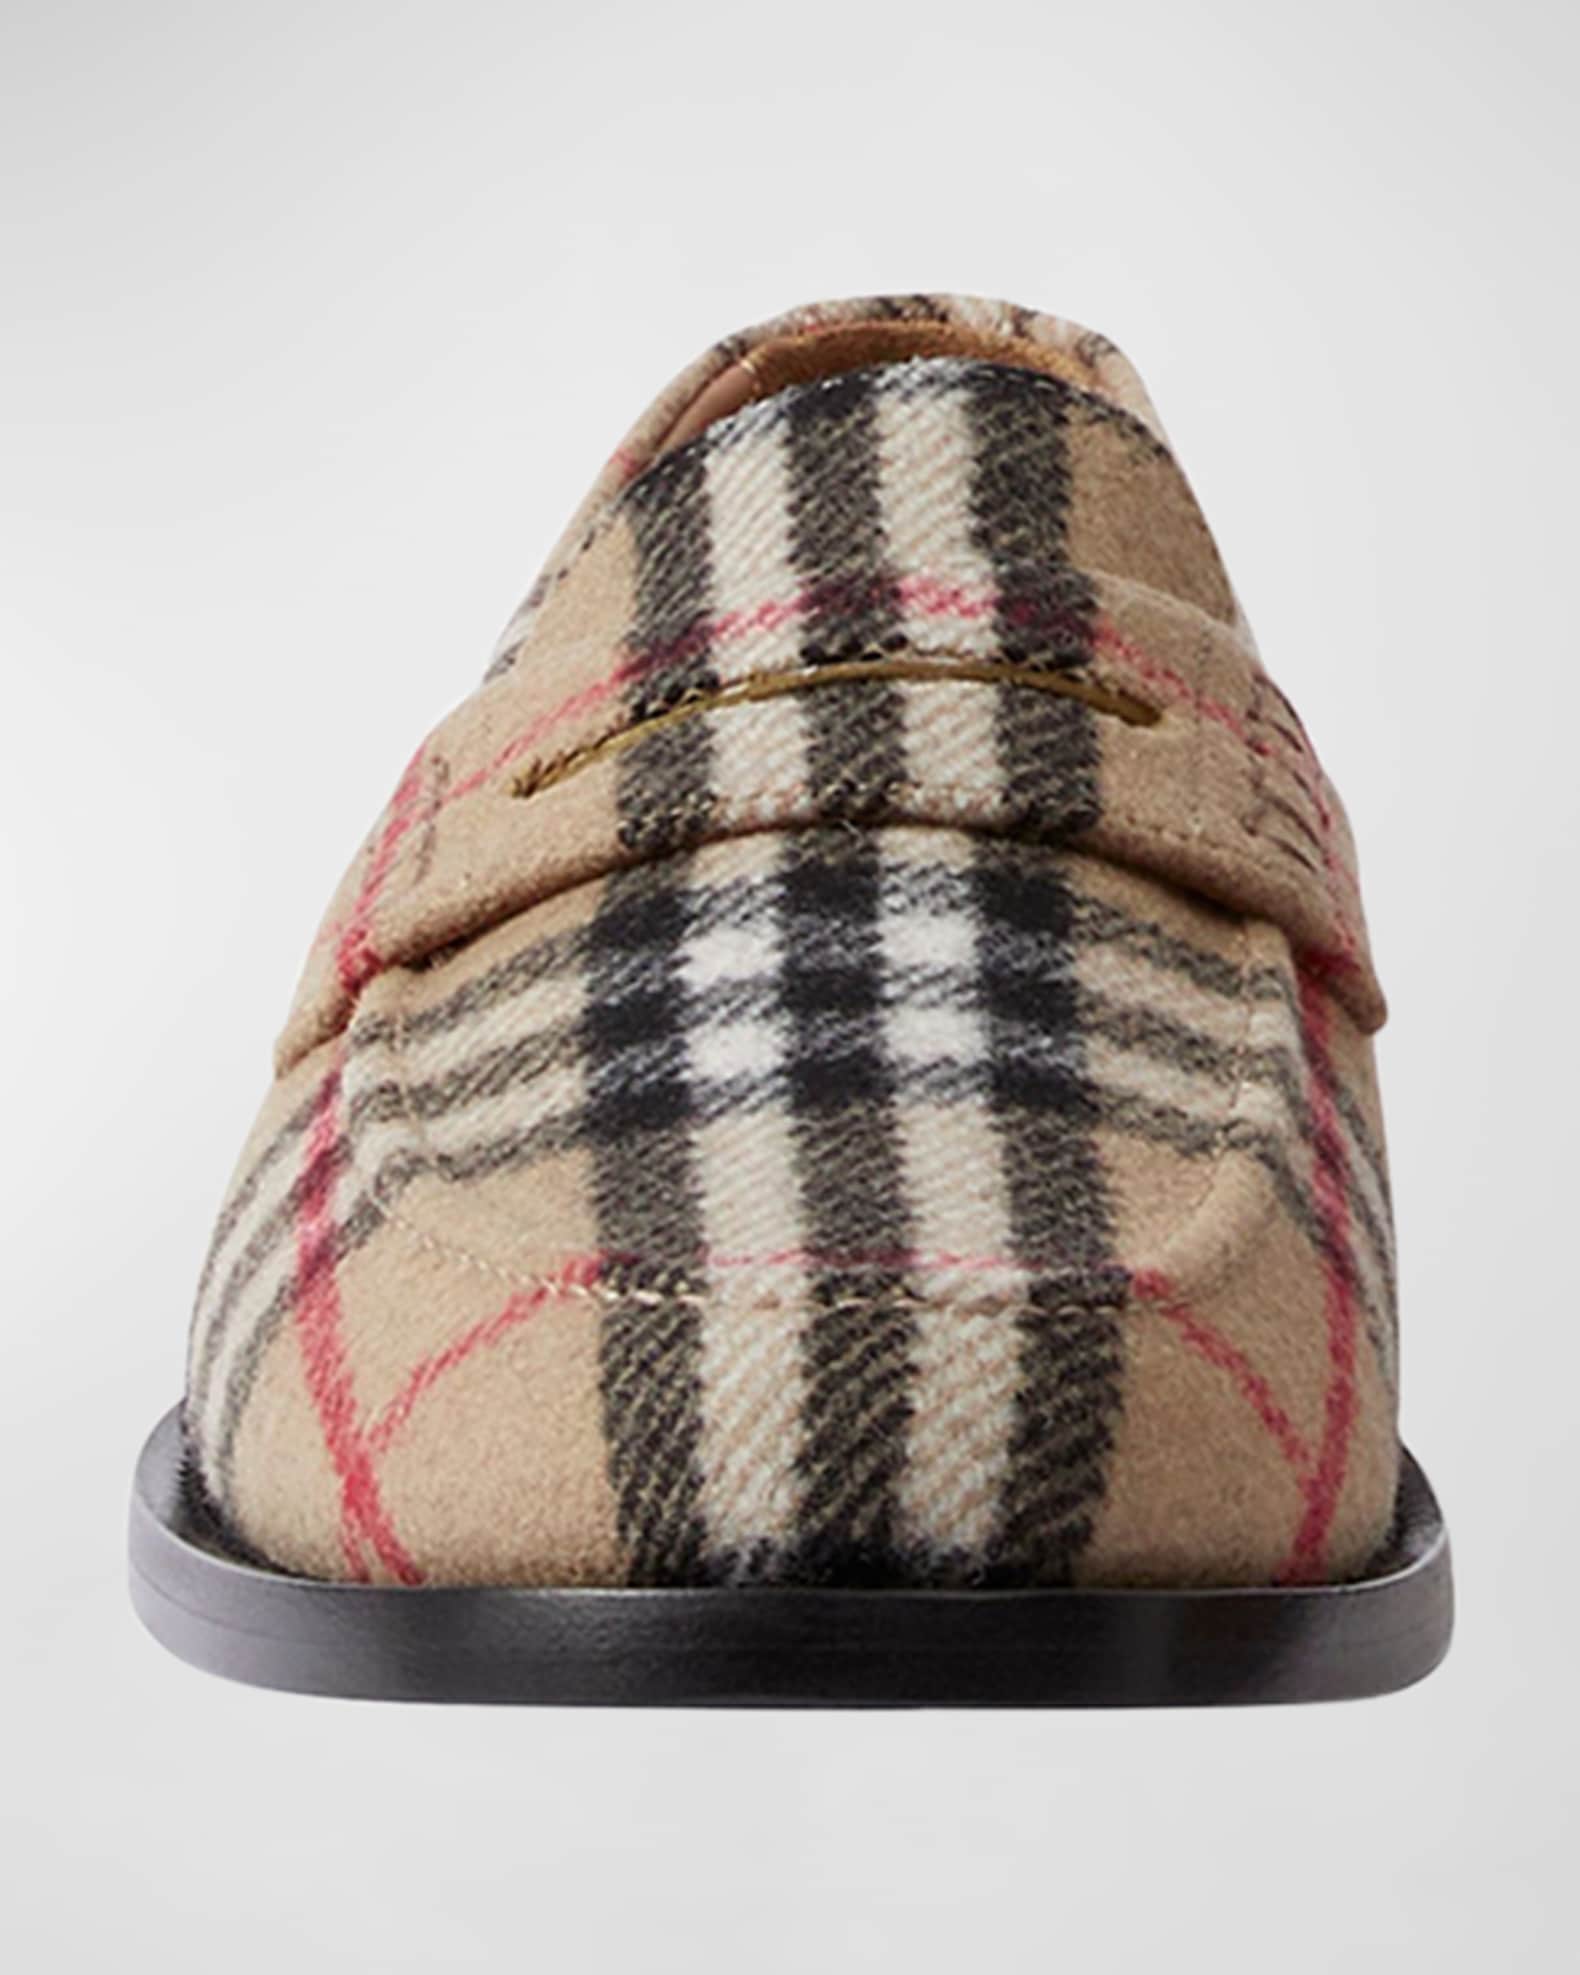 Burberry Hackney Check Penny Loafers | Neiman Marcus